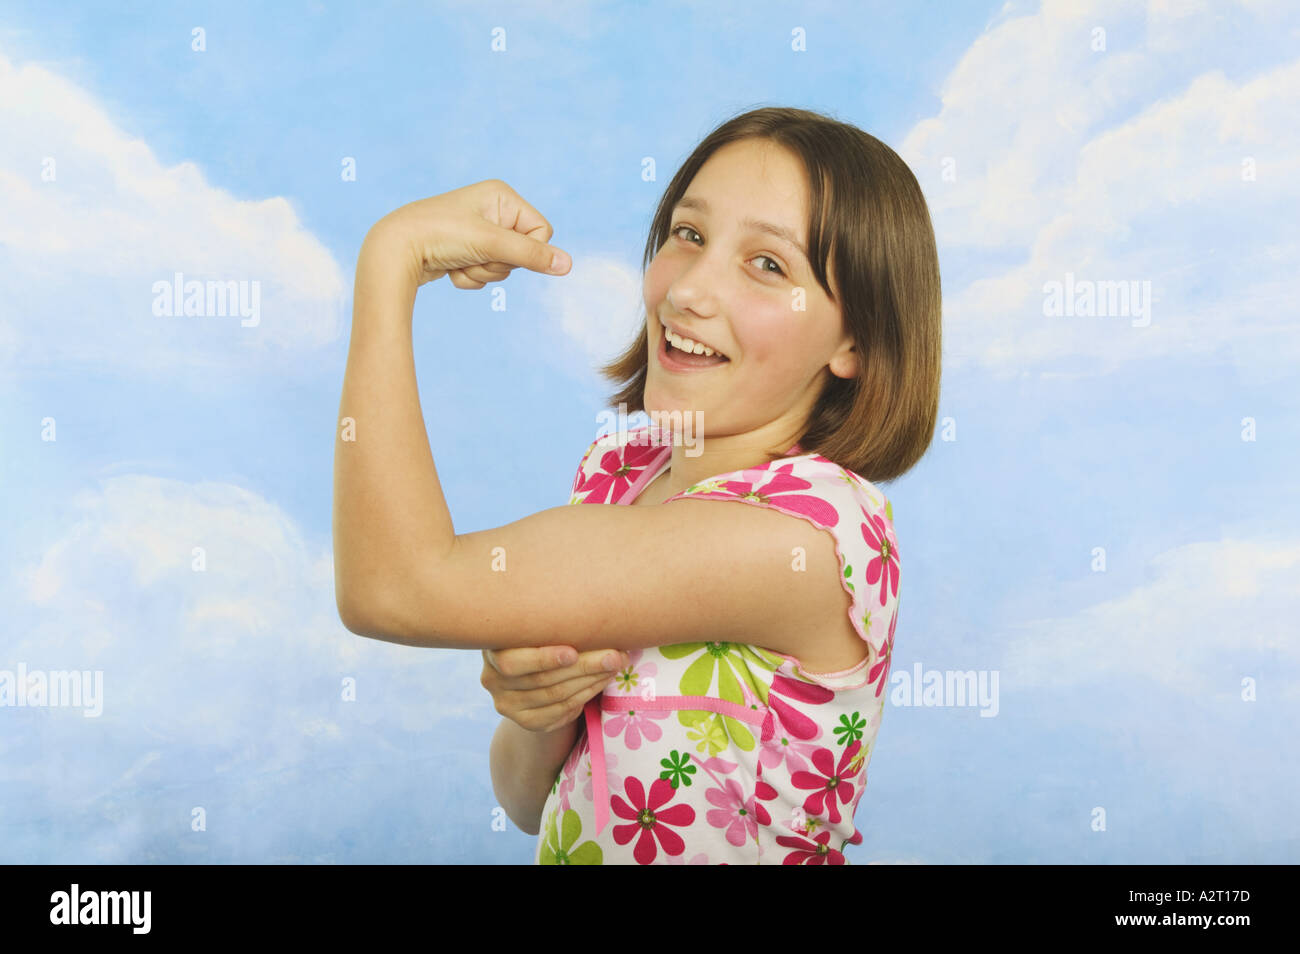 A teenaged girl flexing her muscles Stock Photo